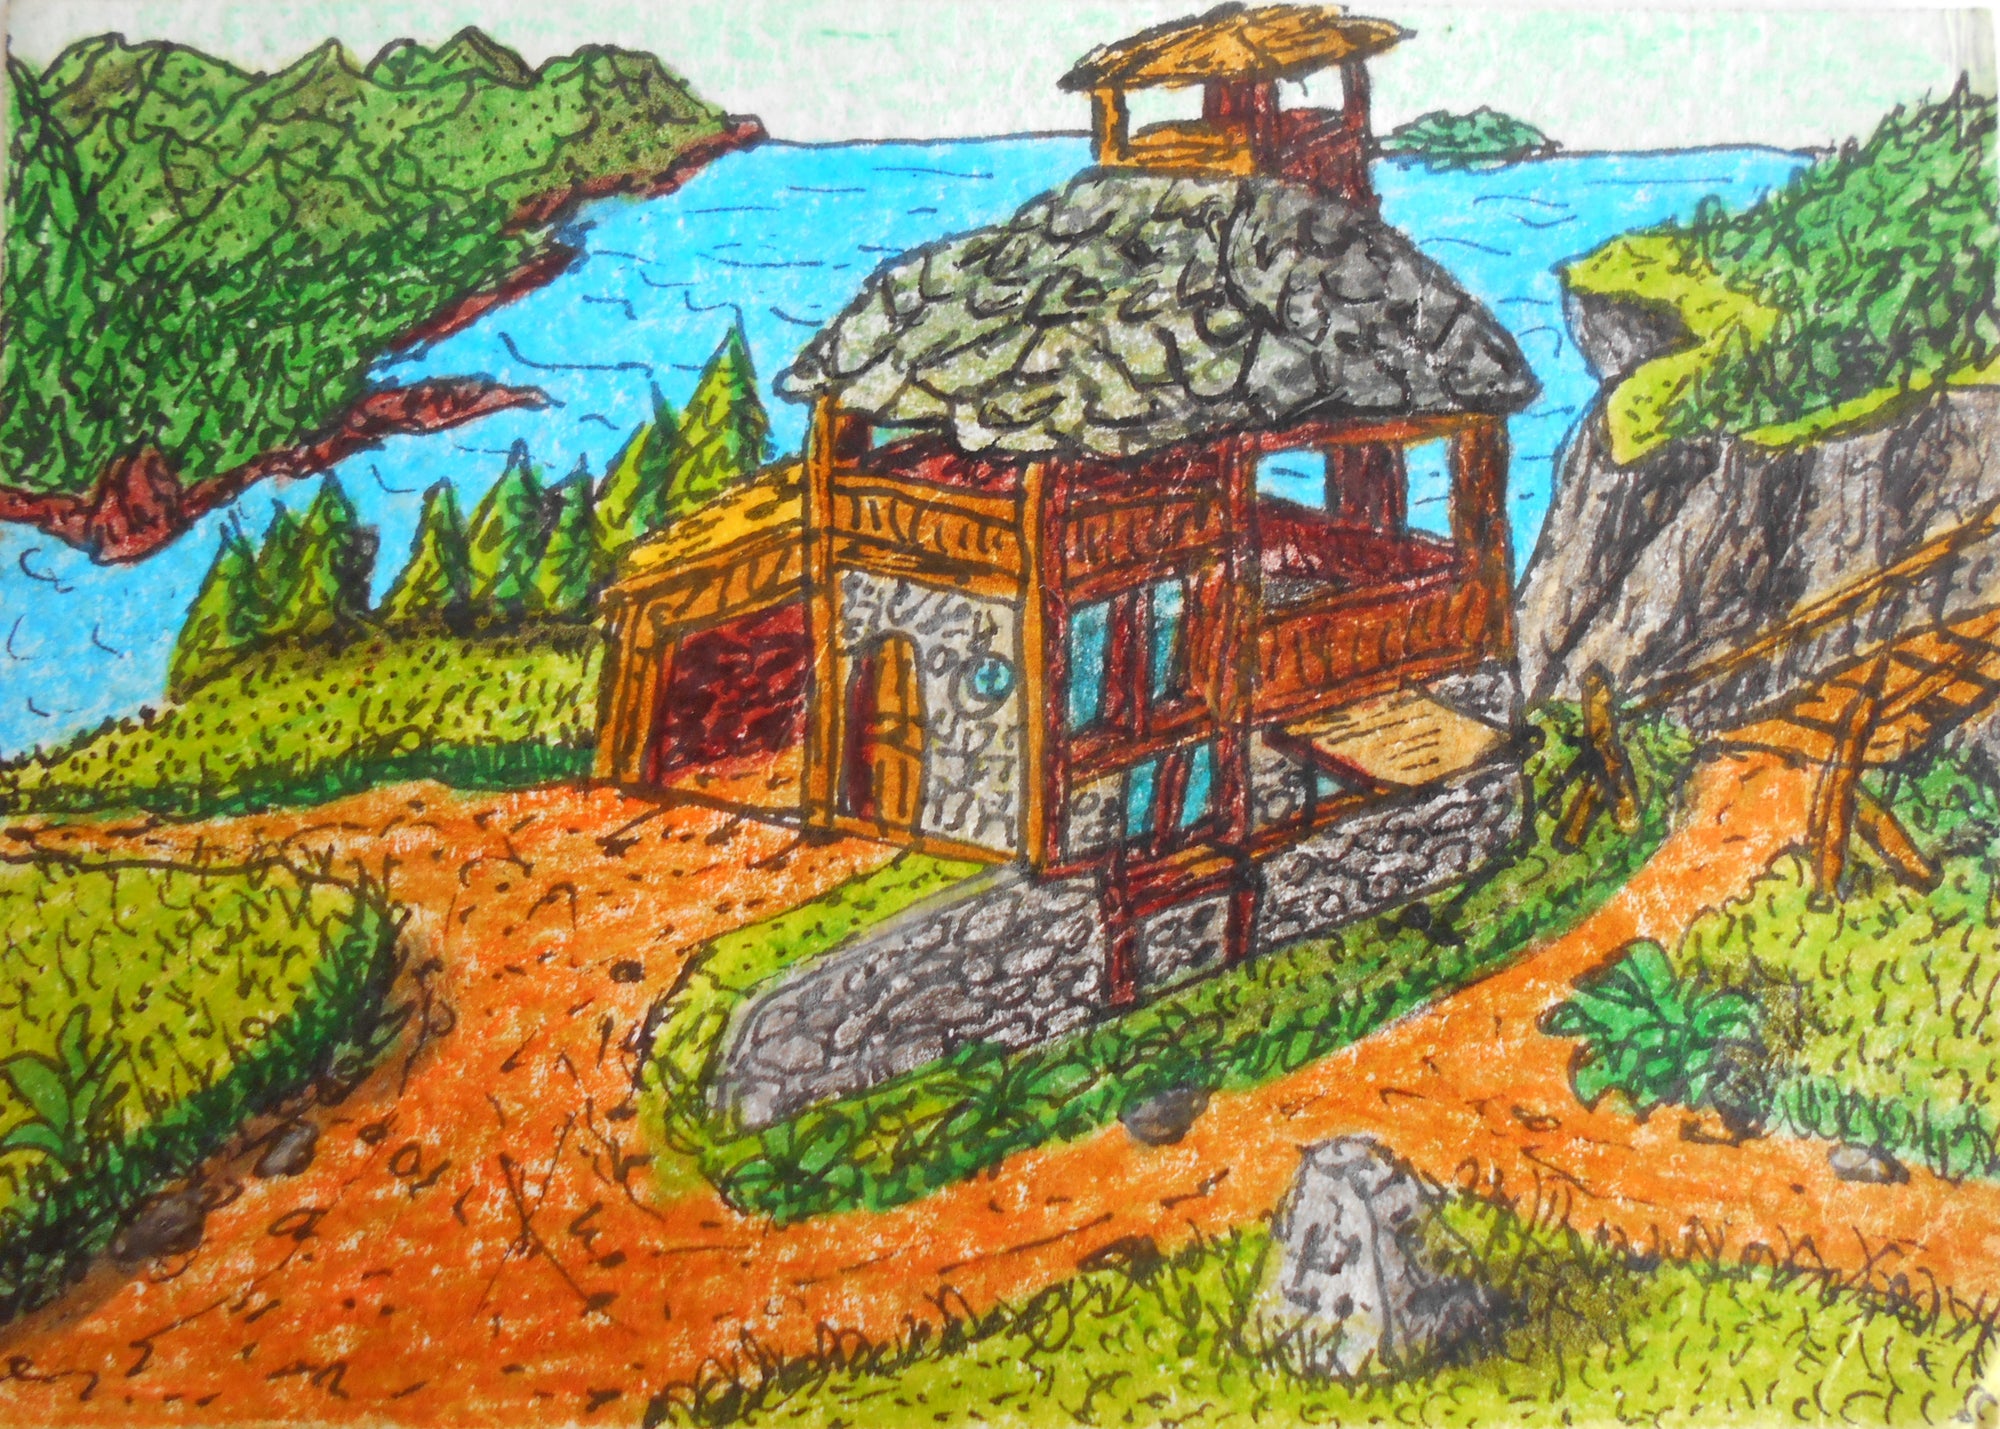 riginal aceo cottage drawing- fantasy art collectable landscape card- ink and pencil drawing titled 'Cross-Norths outpost'- signed by artist Hristo Hvoynev